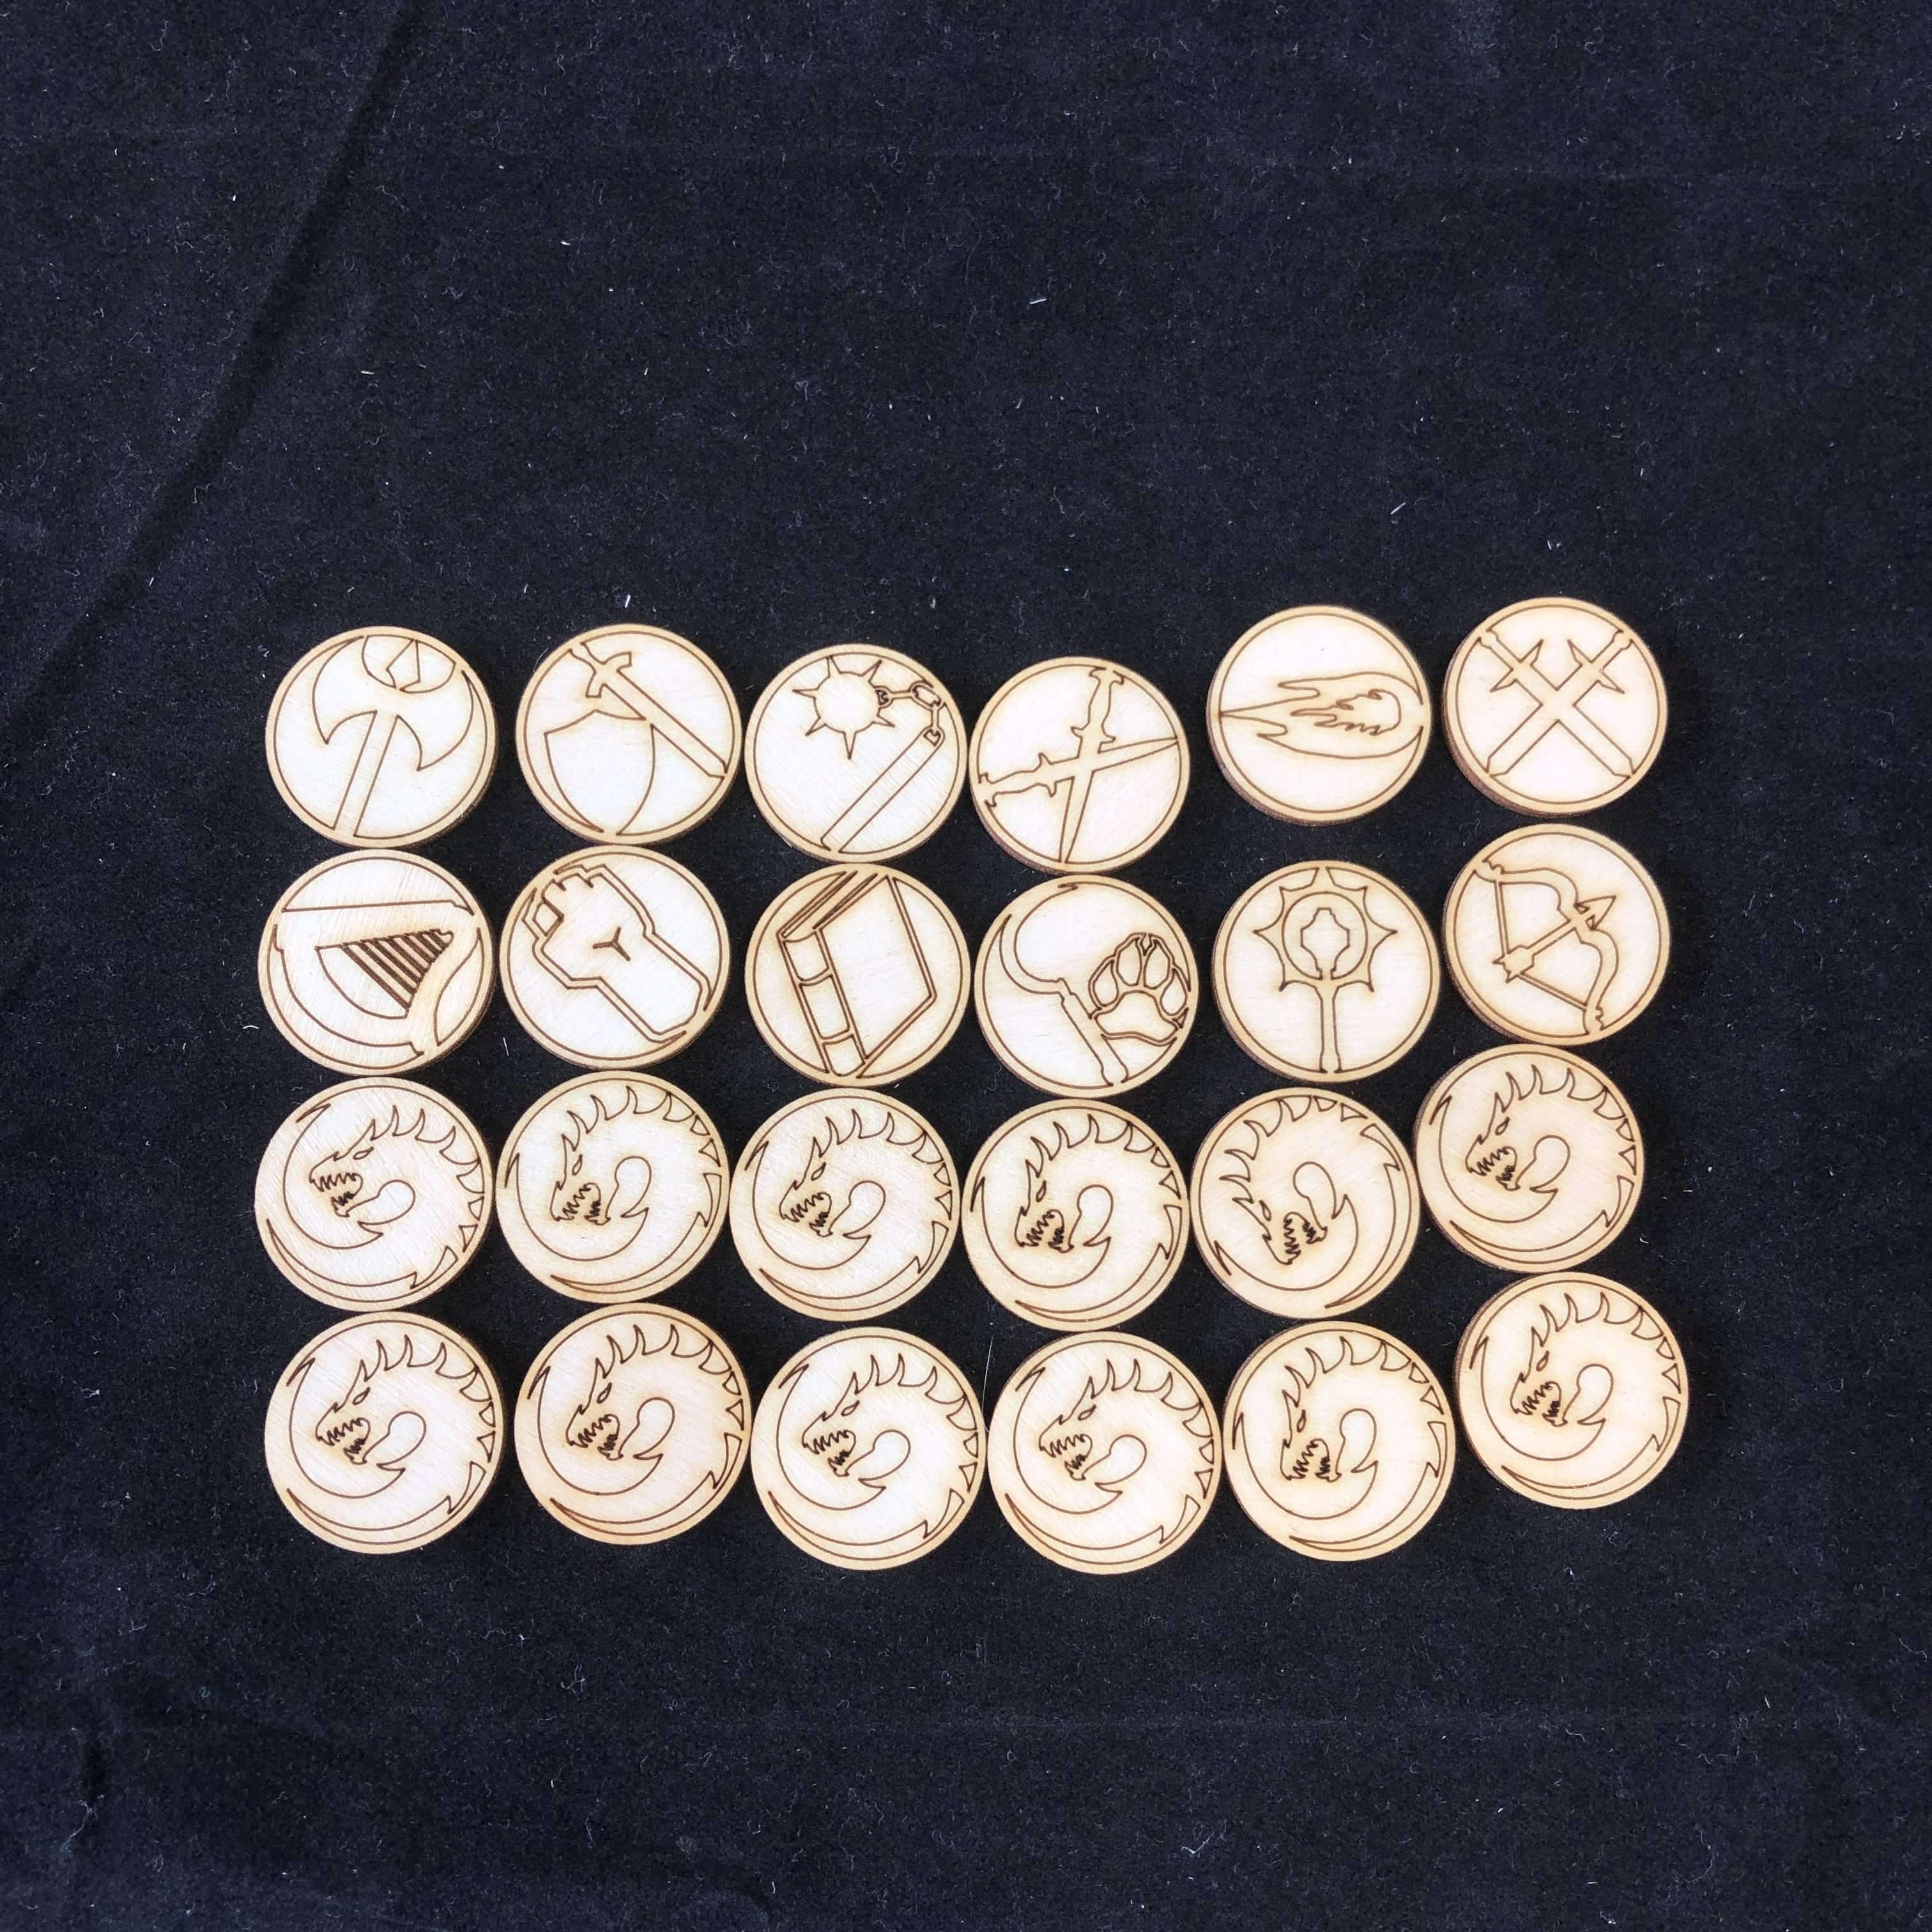 Red Berry Crafts Ltd:RBCBasics Core 24 Piece Gaming Token Set